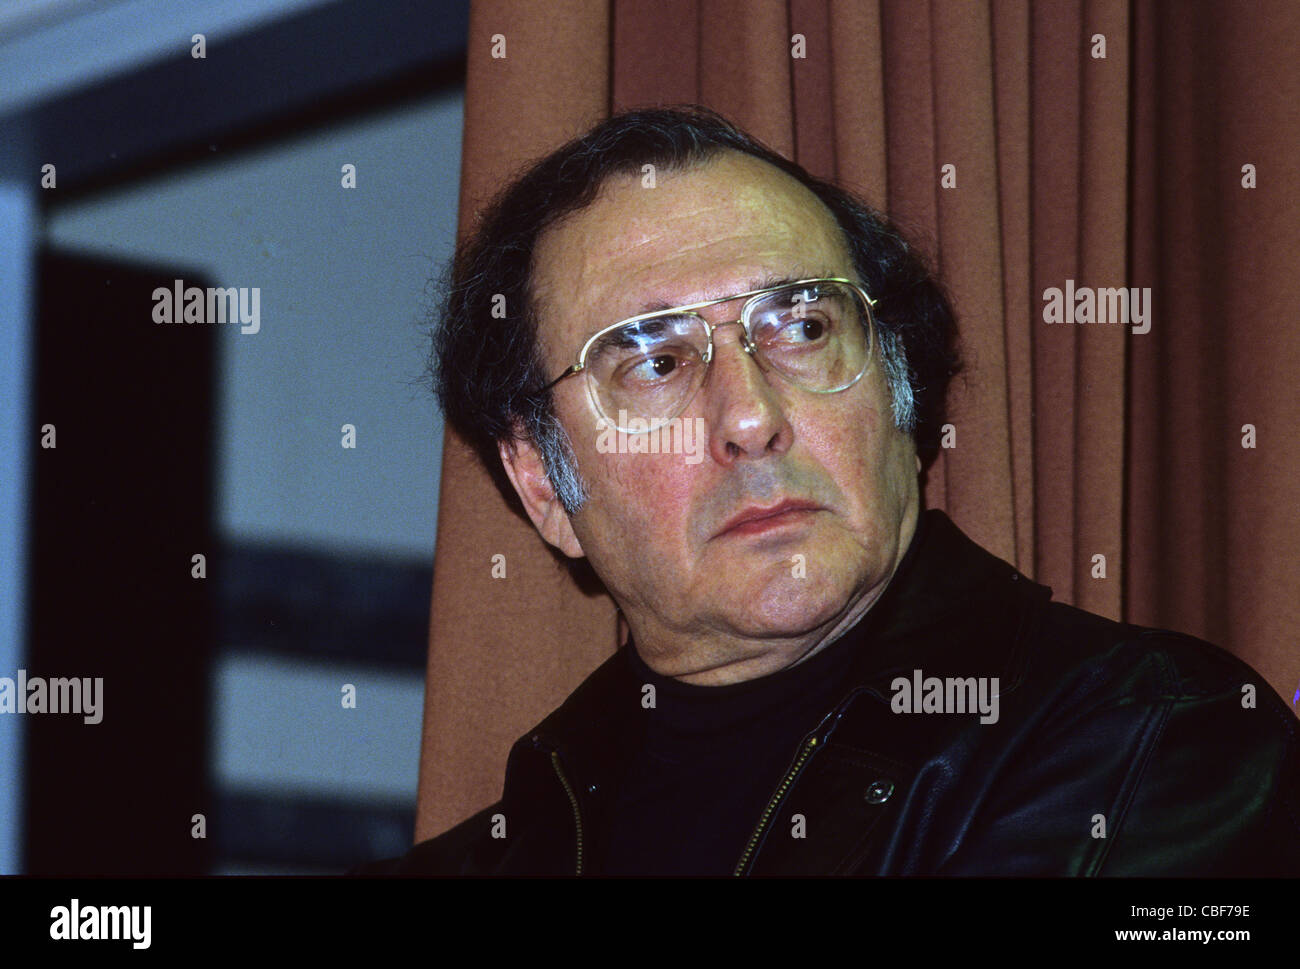 Playwright and thinker, the late Harold Pinter, article 19 meeting speaker on Kurds and censorship Stock Photo